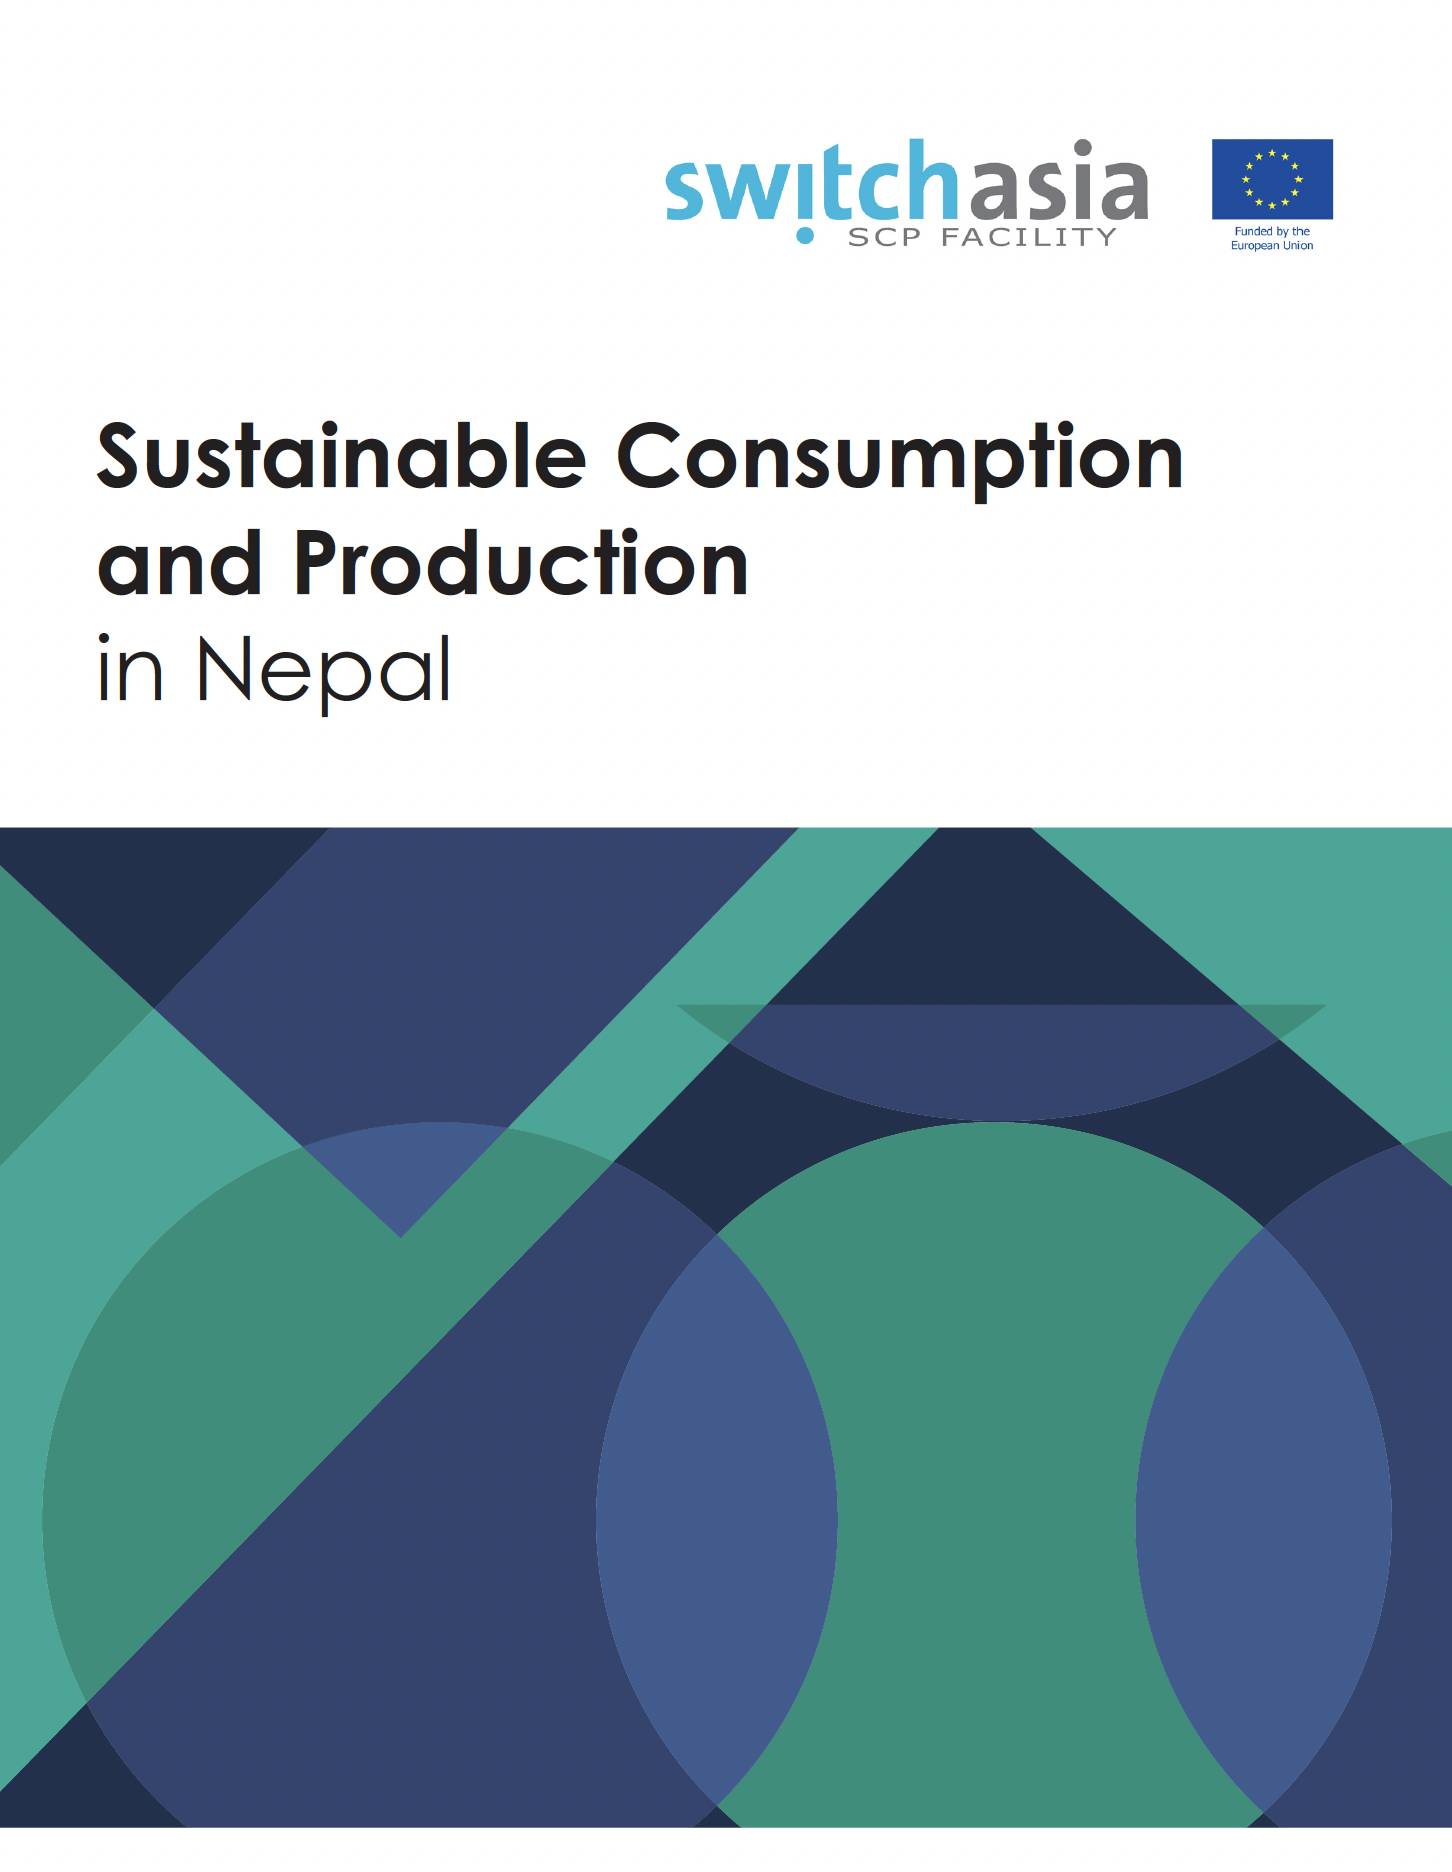 Sustainable Consumption and Production in Nepal